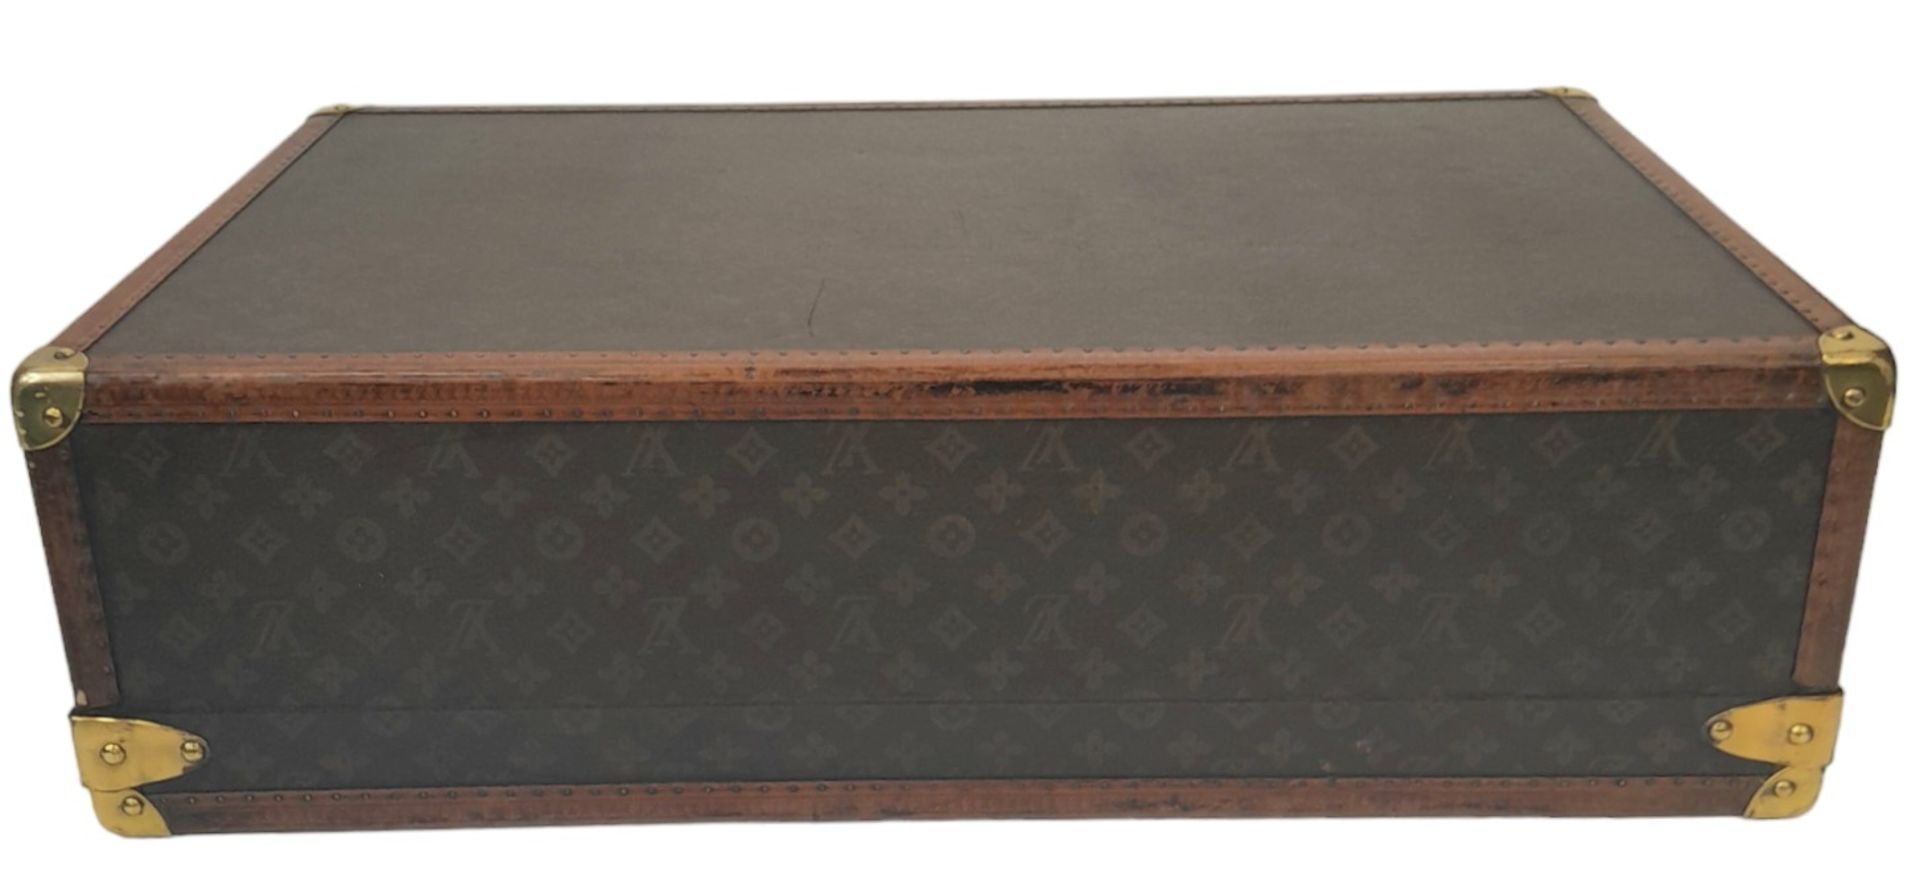 A Vintage Possibly Antique Louis Vuitton Trunk/Hard Suitcase. Canvas monogram LV exterior with - Image 3 of 16